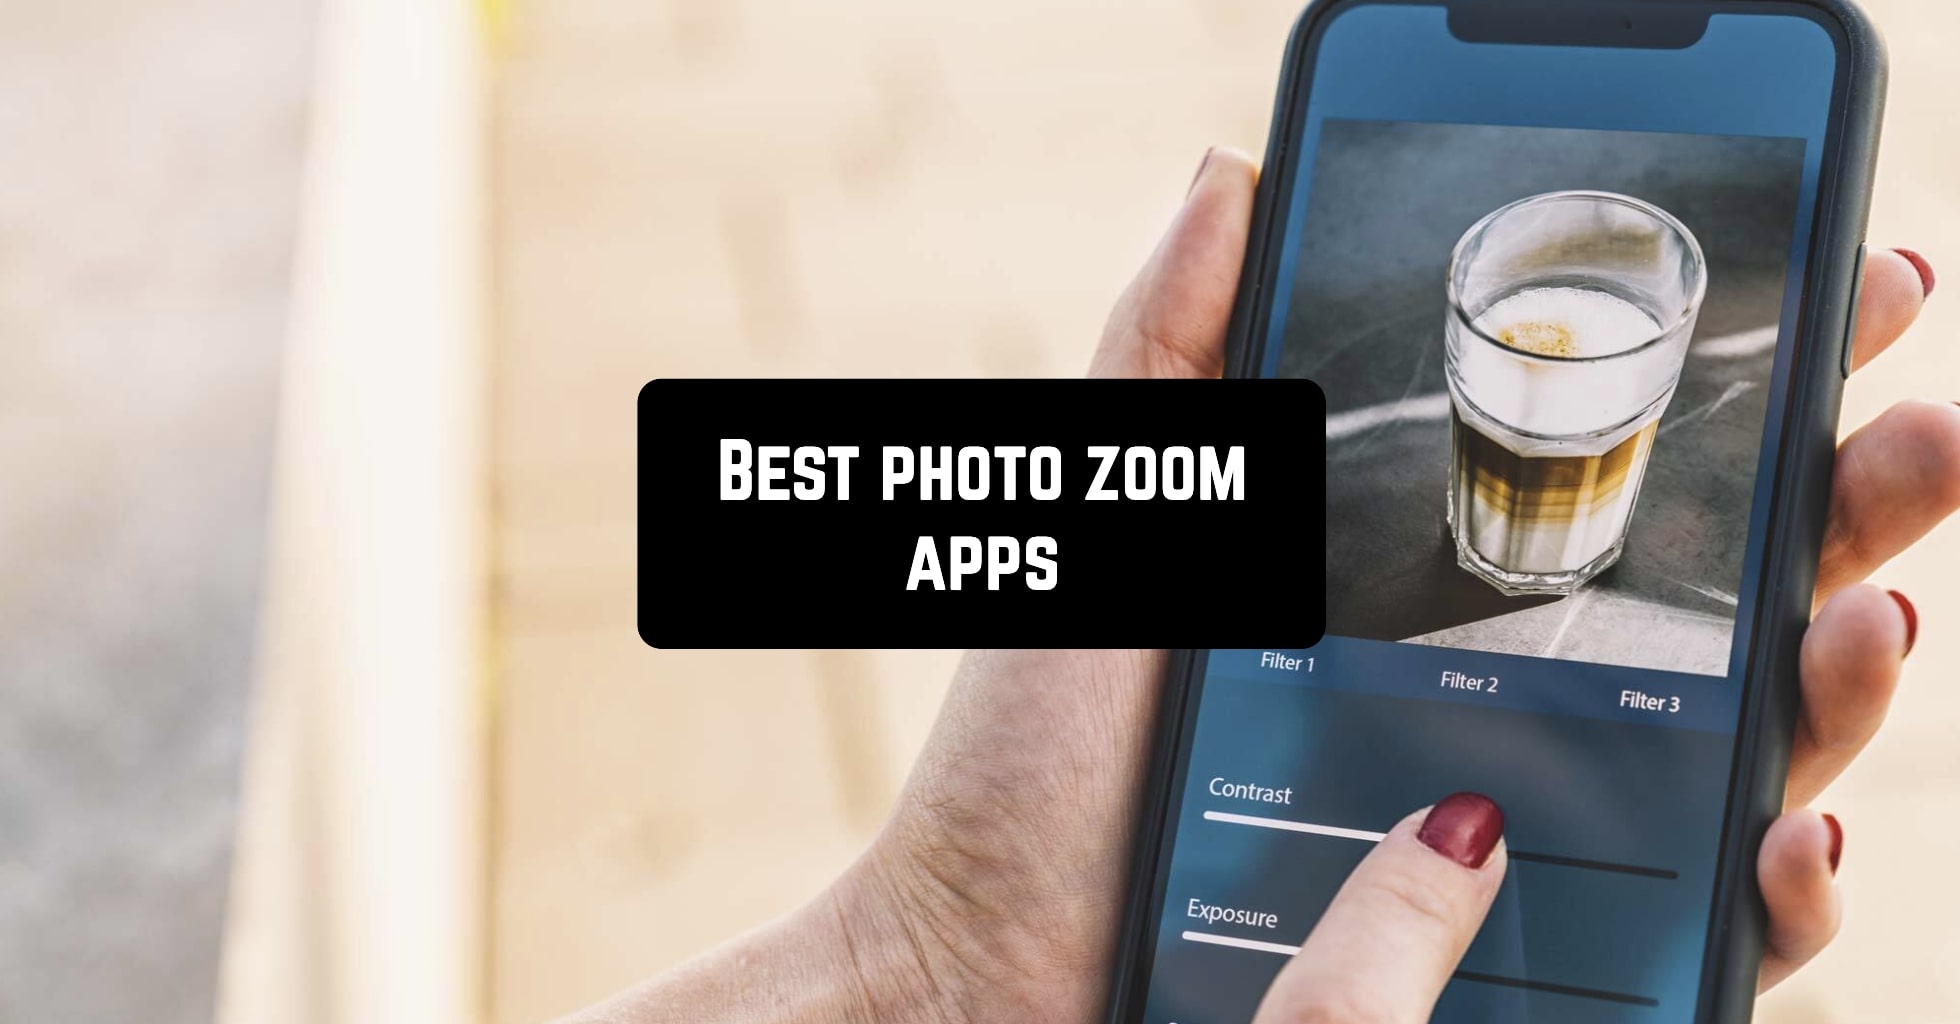 15 Best photo zoom apps for Android & iOS